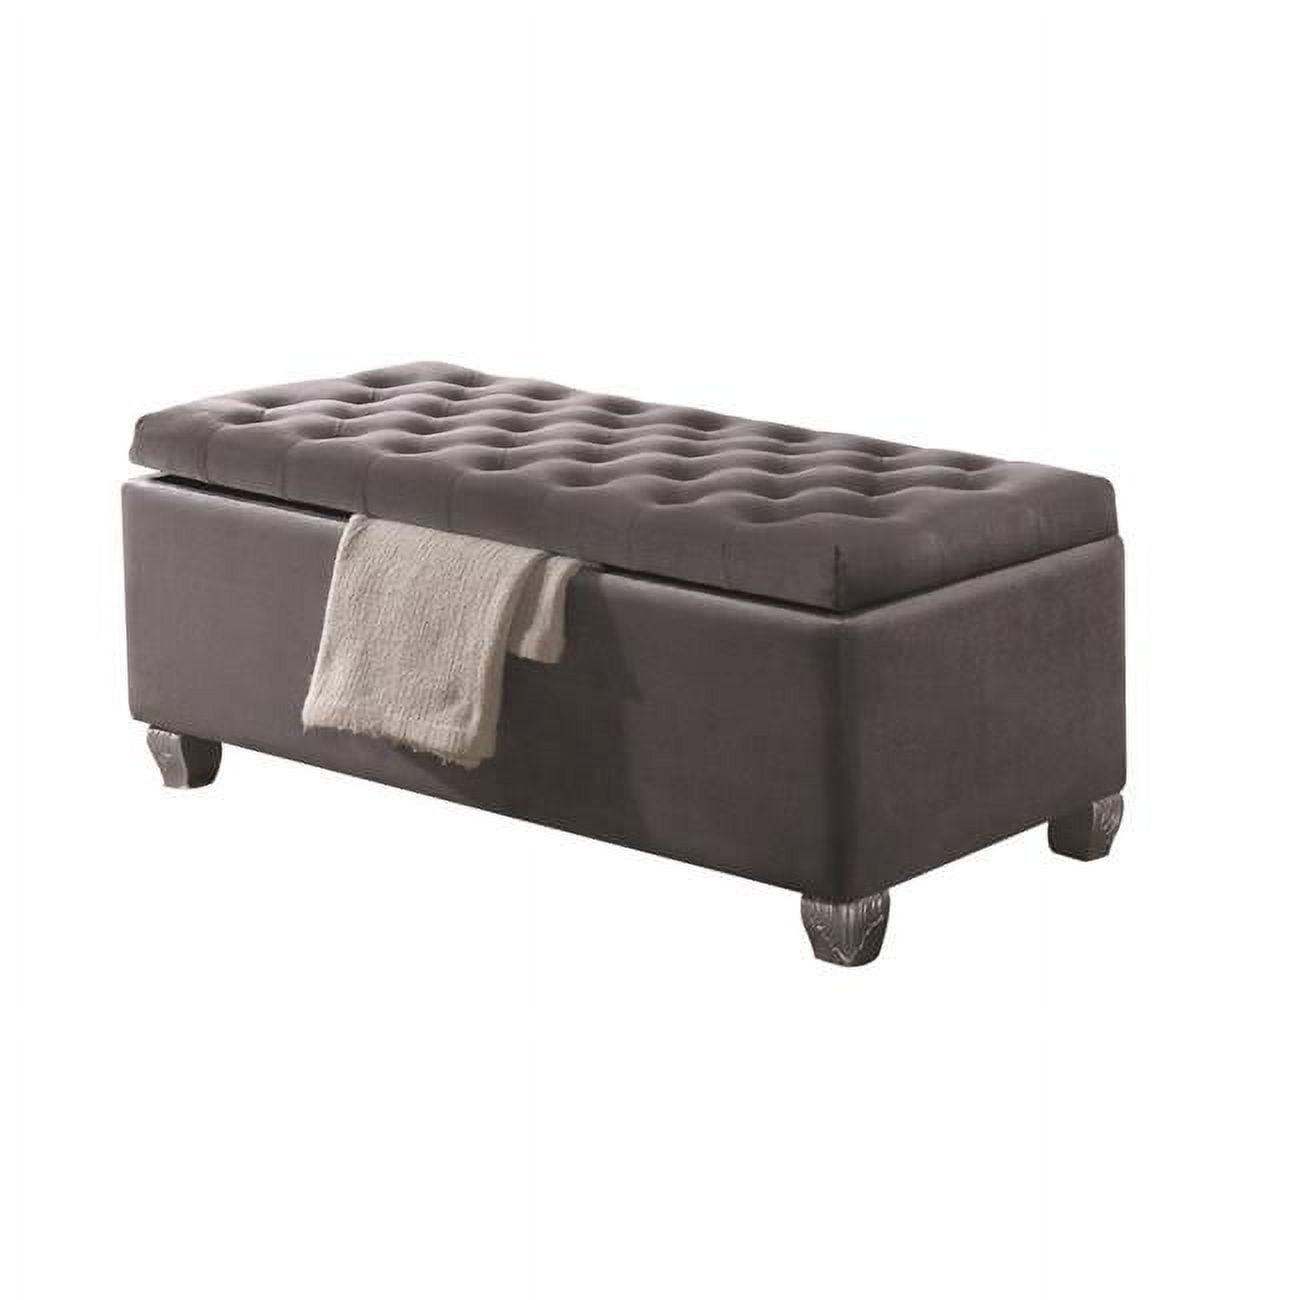 Picture of ACME 96546 Rectangular Rebekah Bench with Storage - Gray Fabric - 19 x 45 x 16 in.